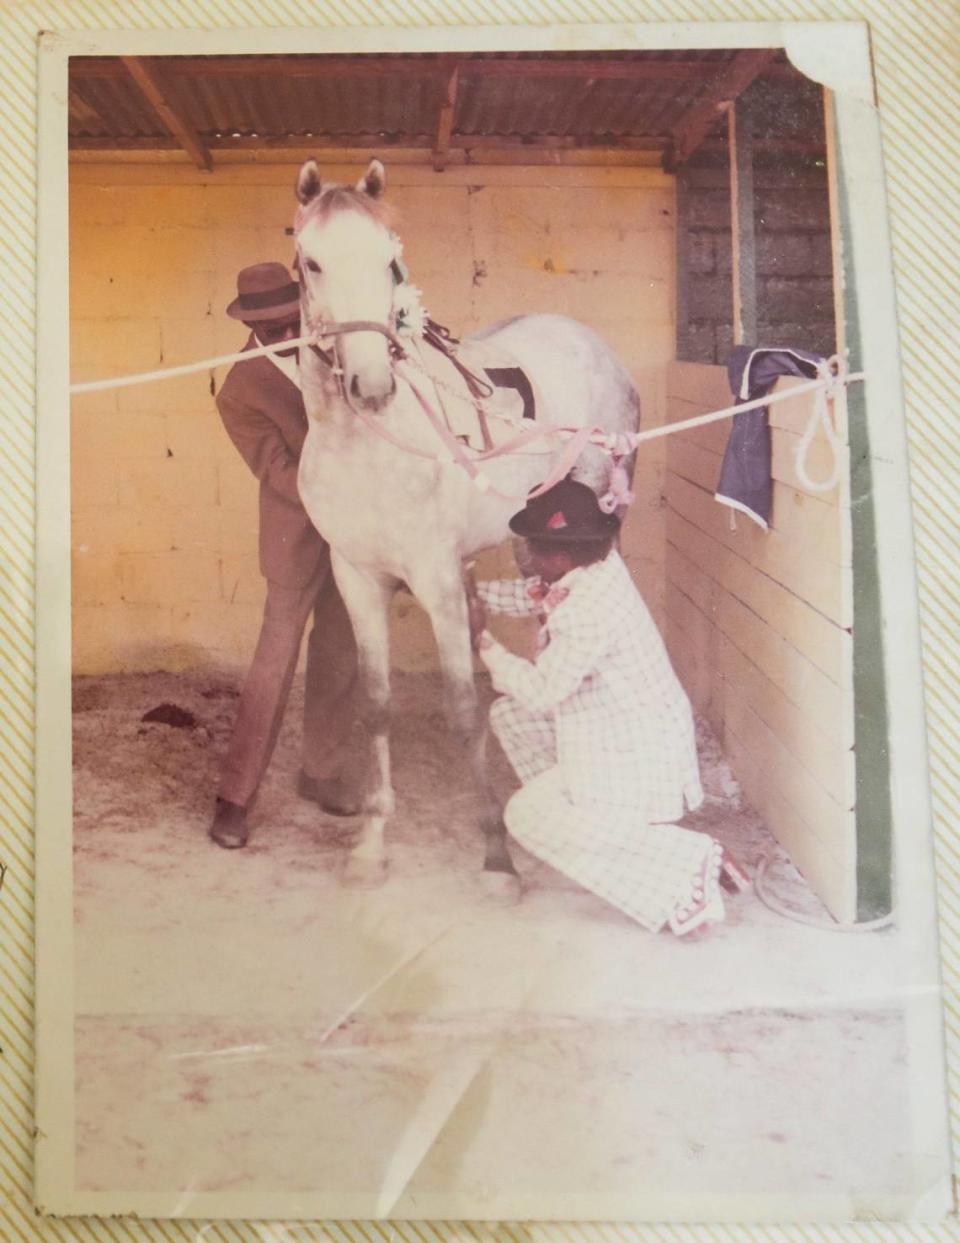 Larry Demeritte (right) with his father Thomas (left) prepare a horse for a race in the early 1970s in The Bahamas.